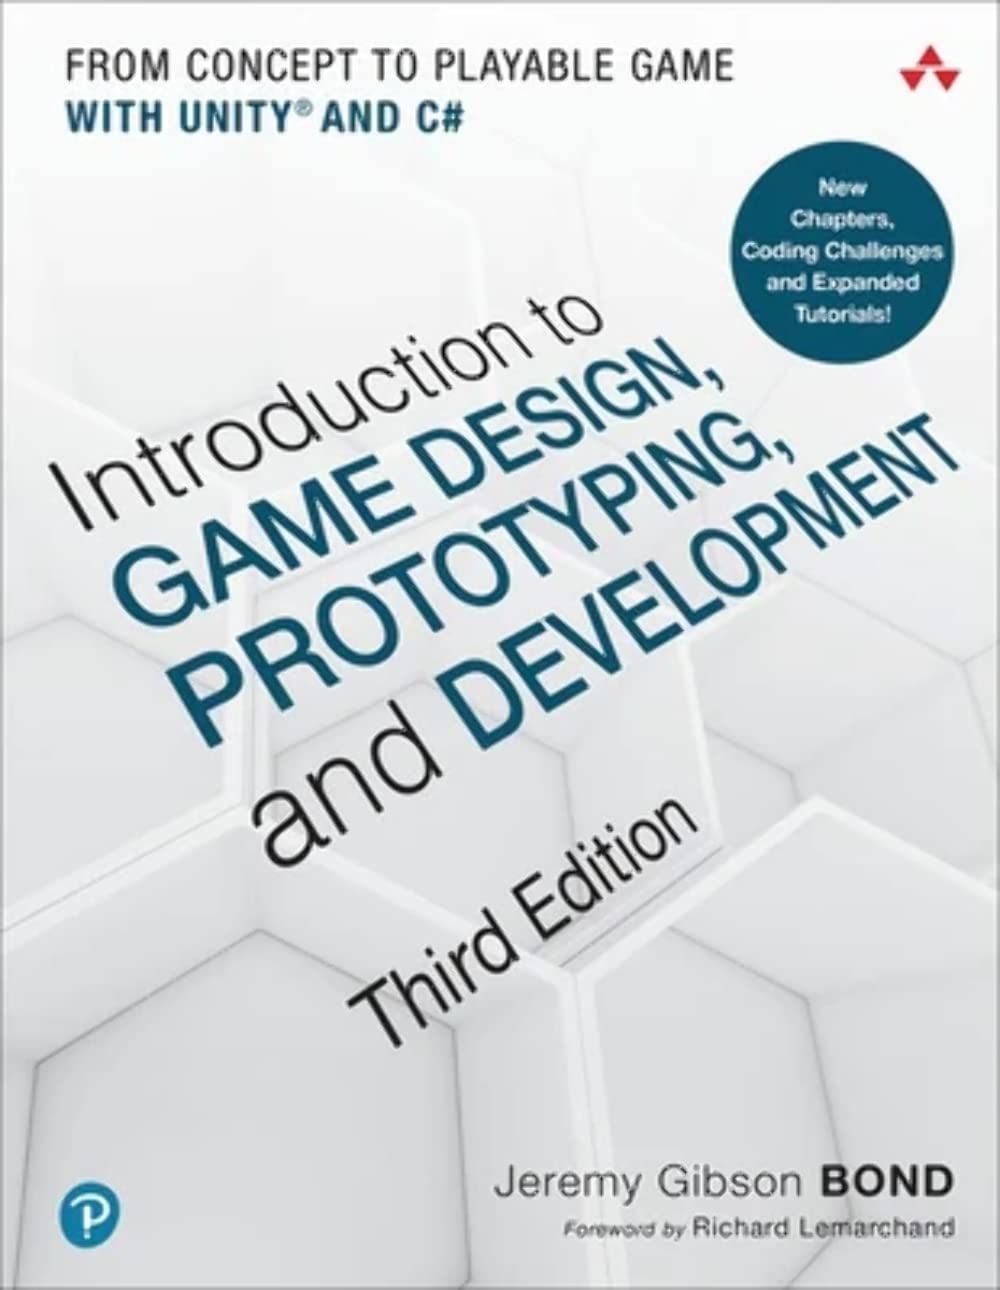 Introduction to Game Design, Prototyping, and Development: From__ Concept to Playable Game with Unity and C＃, 3rd Edition by  Jeremy Gibson Bond